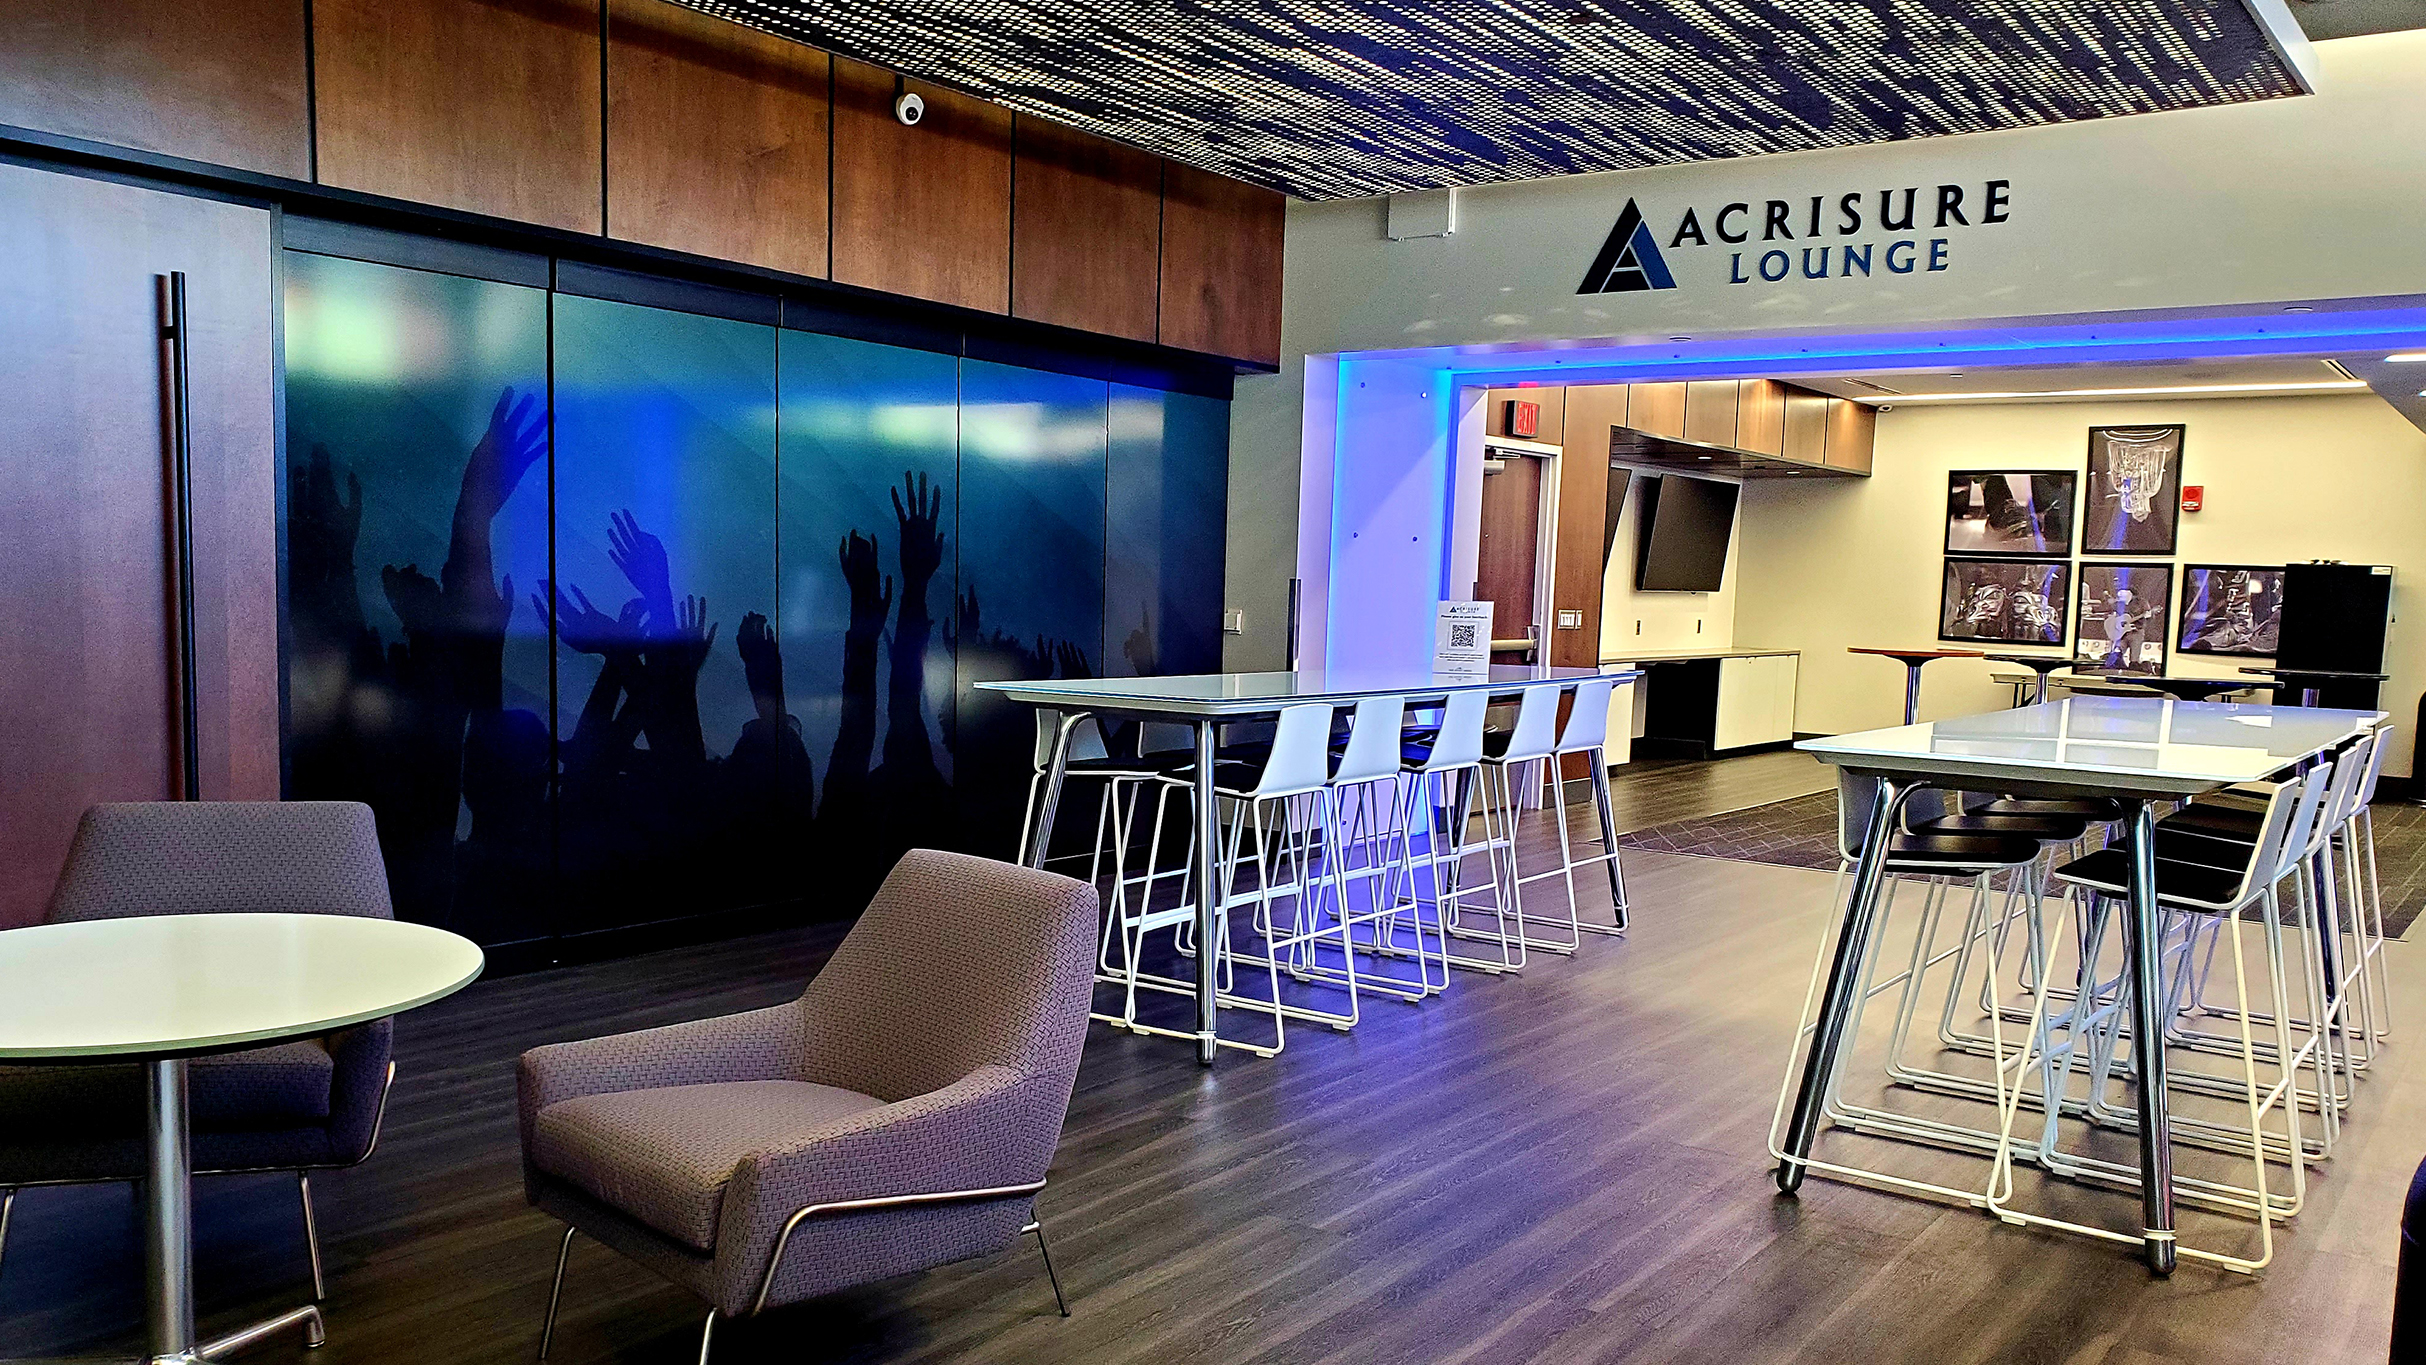 Acrisure Lounge:For King + Country Pre-Show Access-Not an Event Ticket